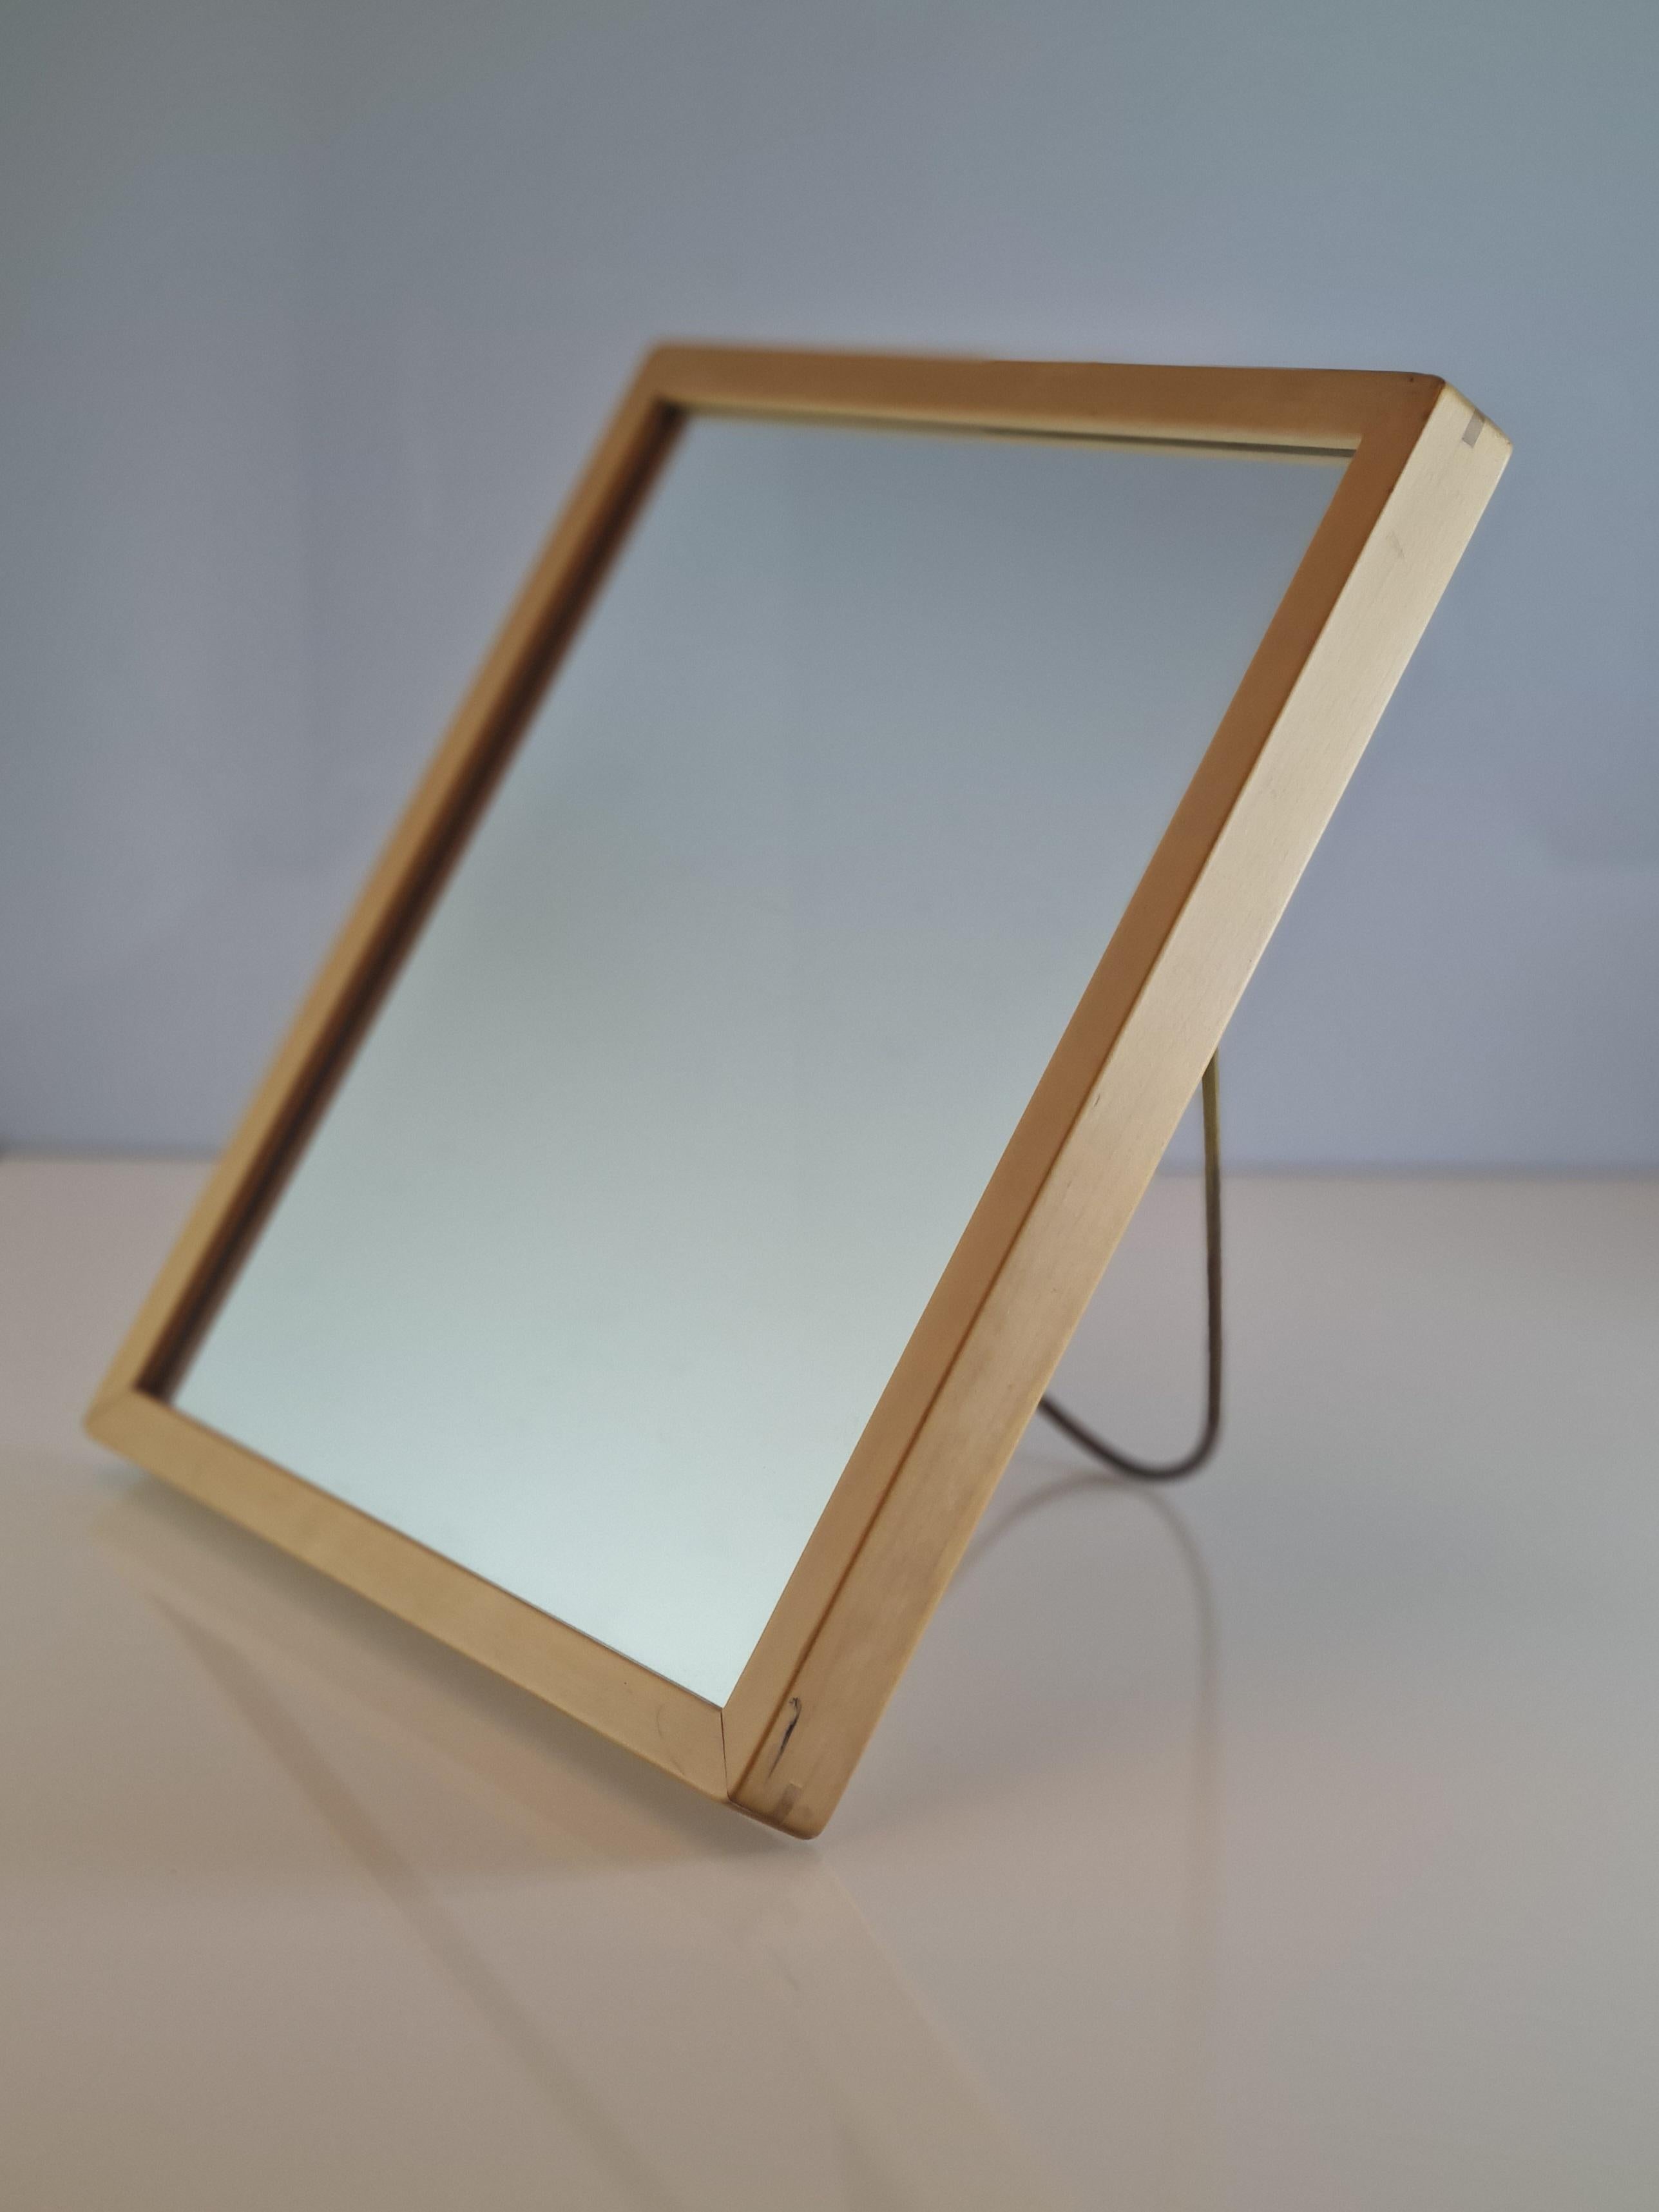 This mirror makes a great addition to any space, be it a bedroom,  office table, or an entrance. So simple yet so practical due to its ability to hang on a wall or be set on a table with the help of the foldable brass support. It's in good condition